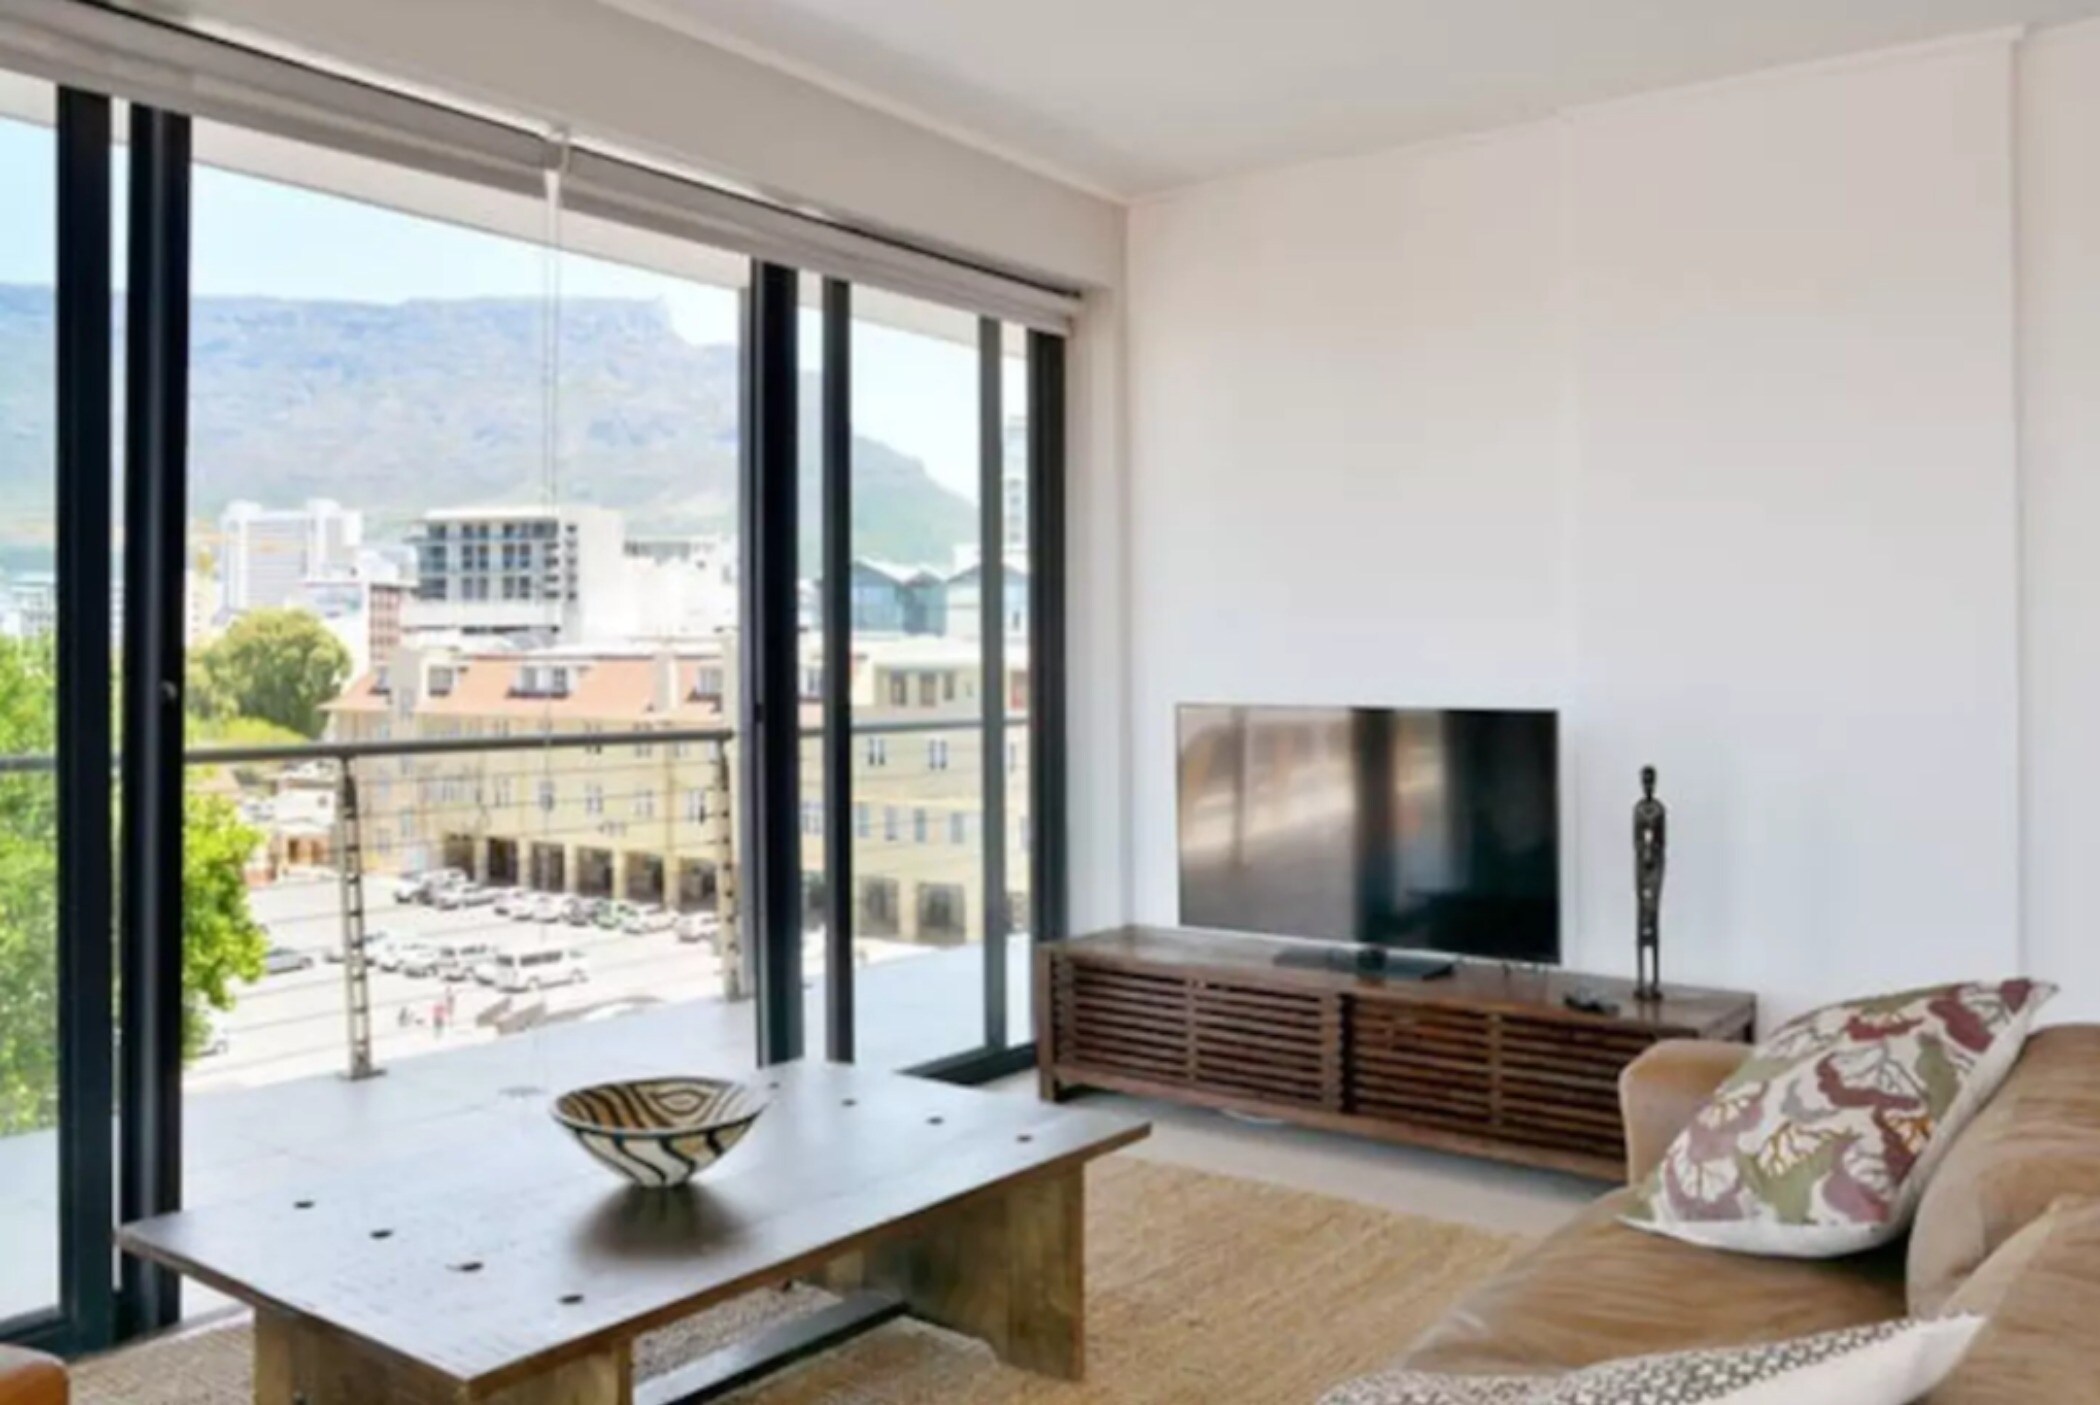 Property Image 1 - Newly renovated apartment located with views of the harbour and Table Mountain.